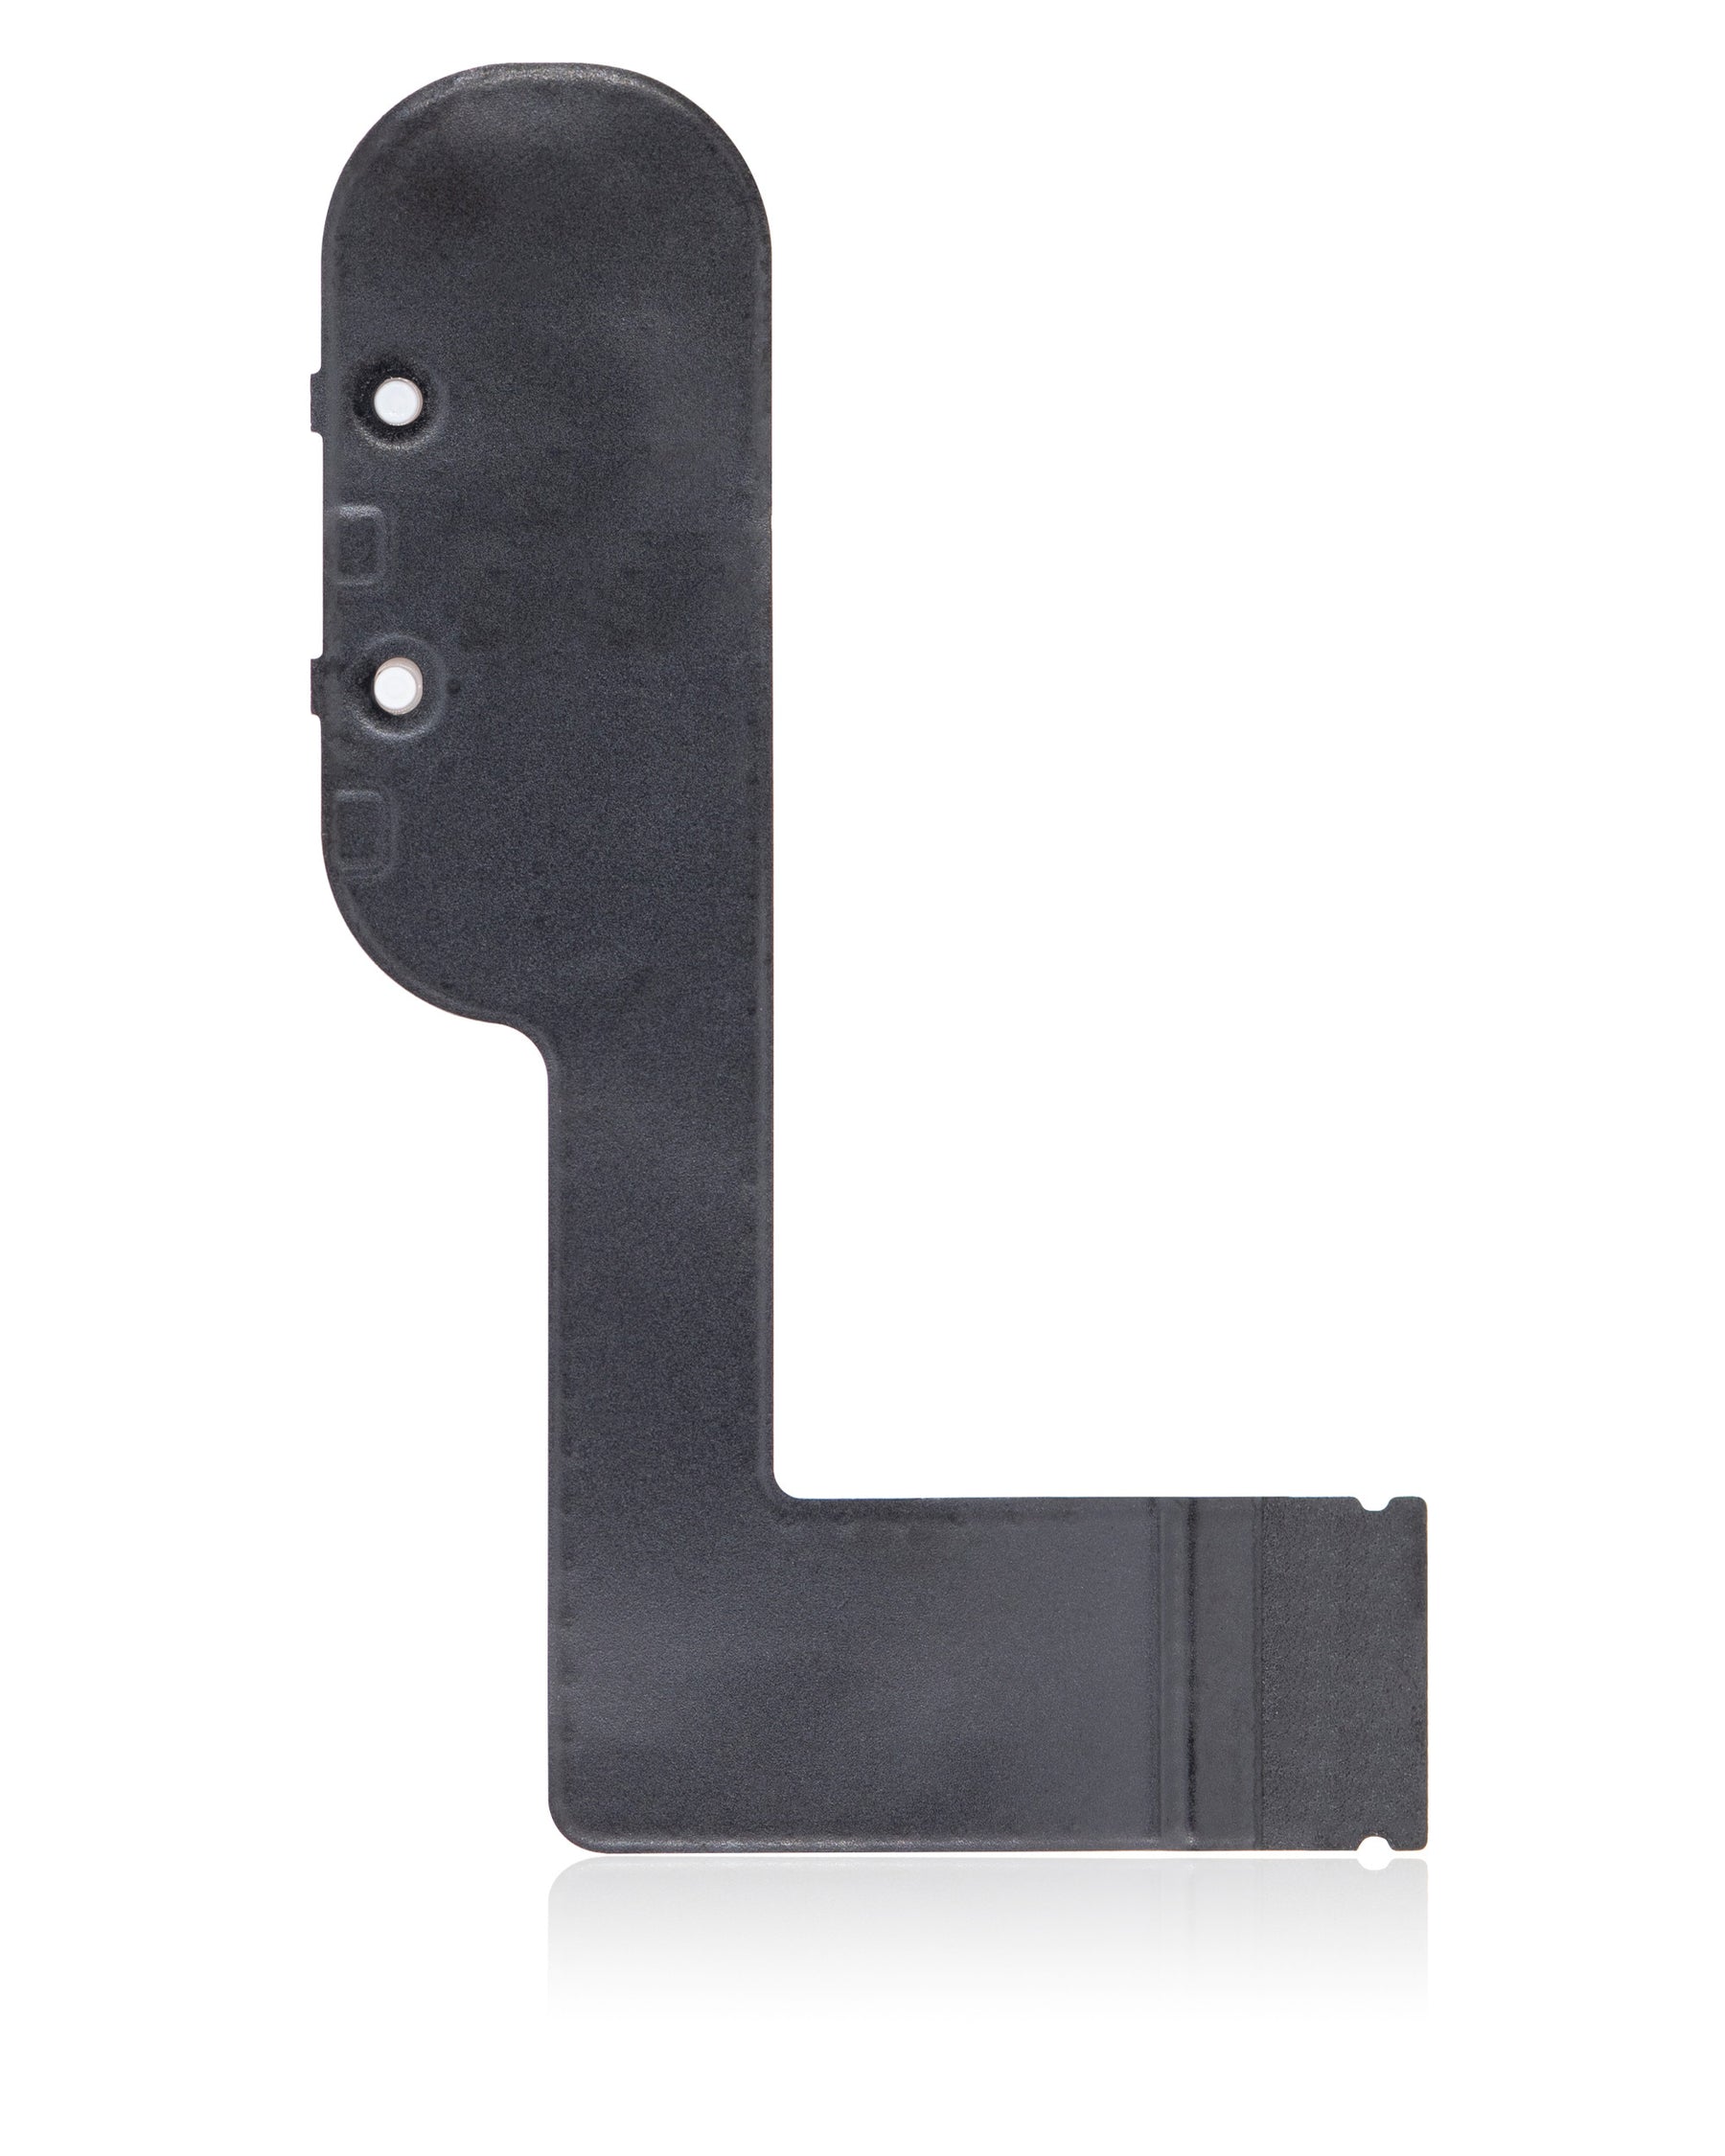 KEYBOARD FLEX CABLE COMPATIBLE FOR IPAD AIR 4 - SILVER